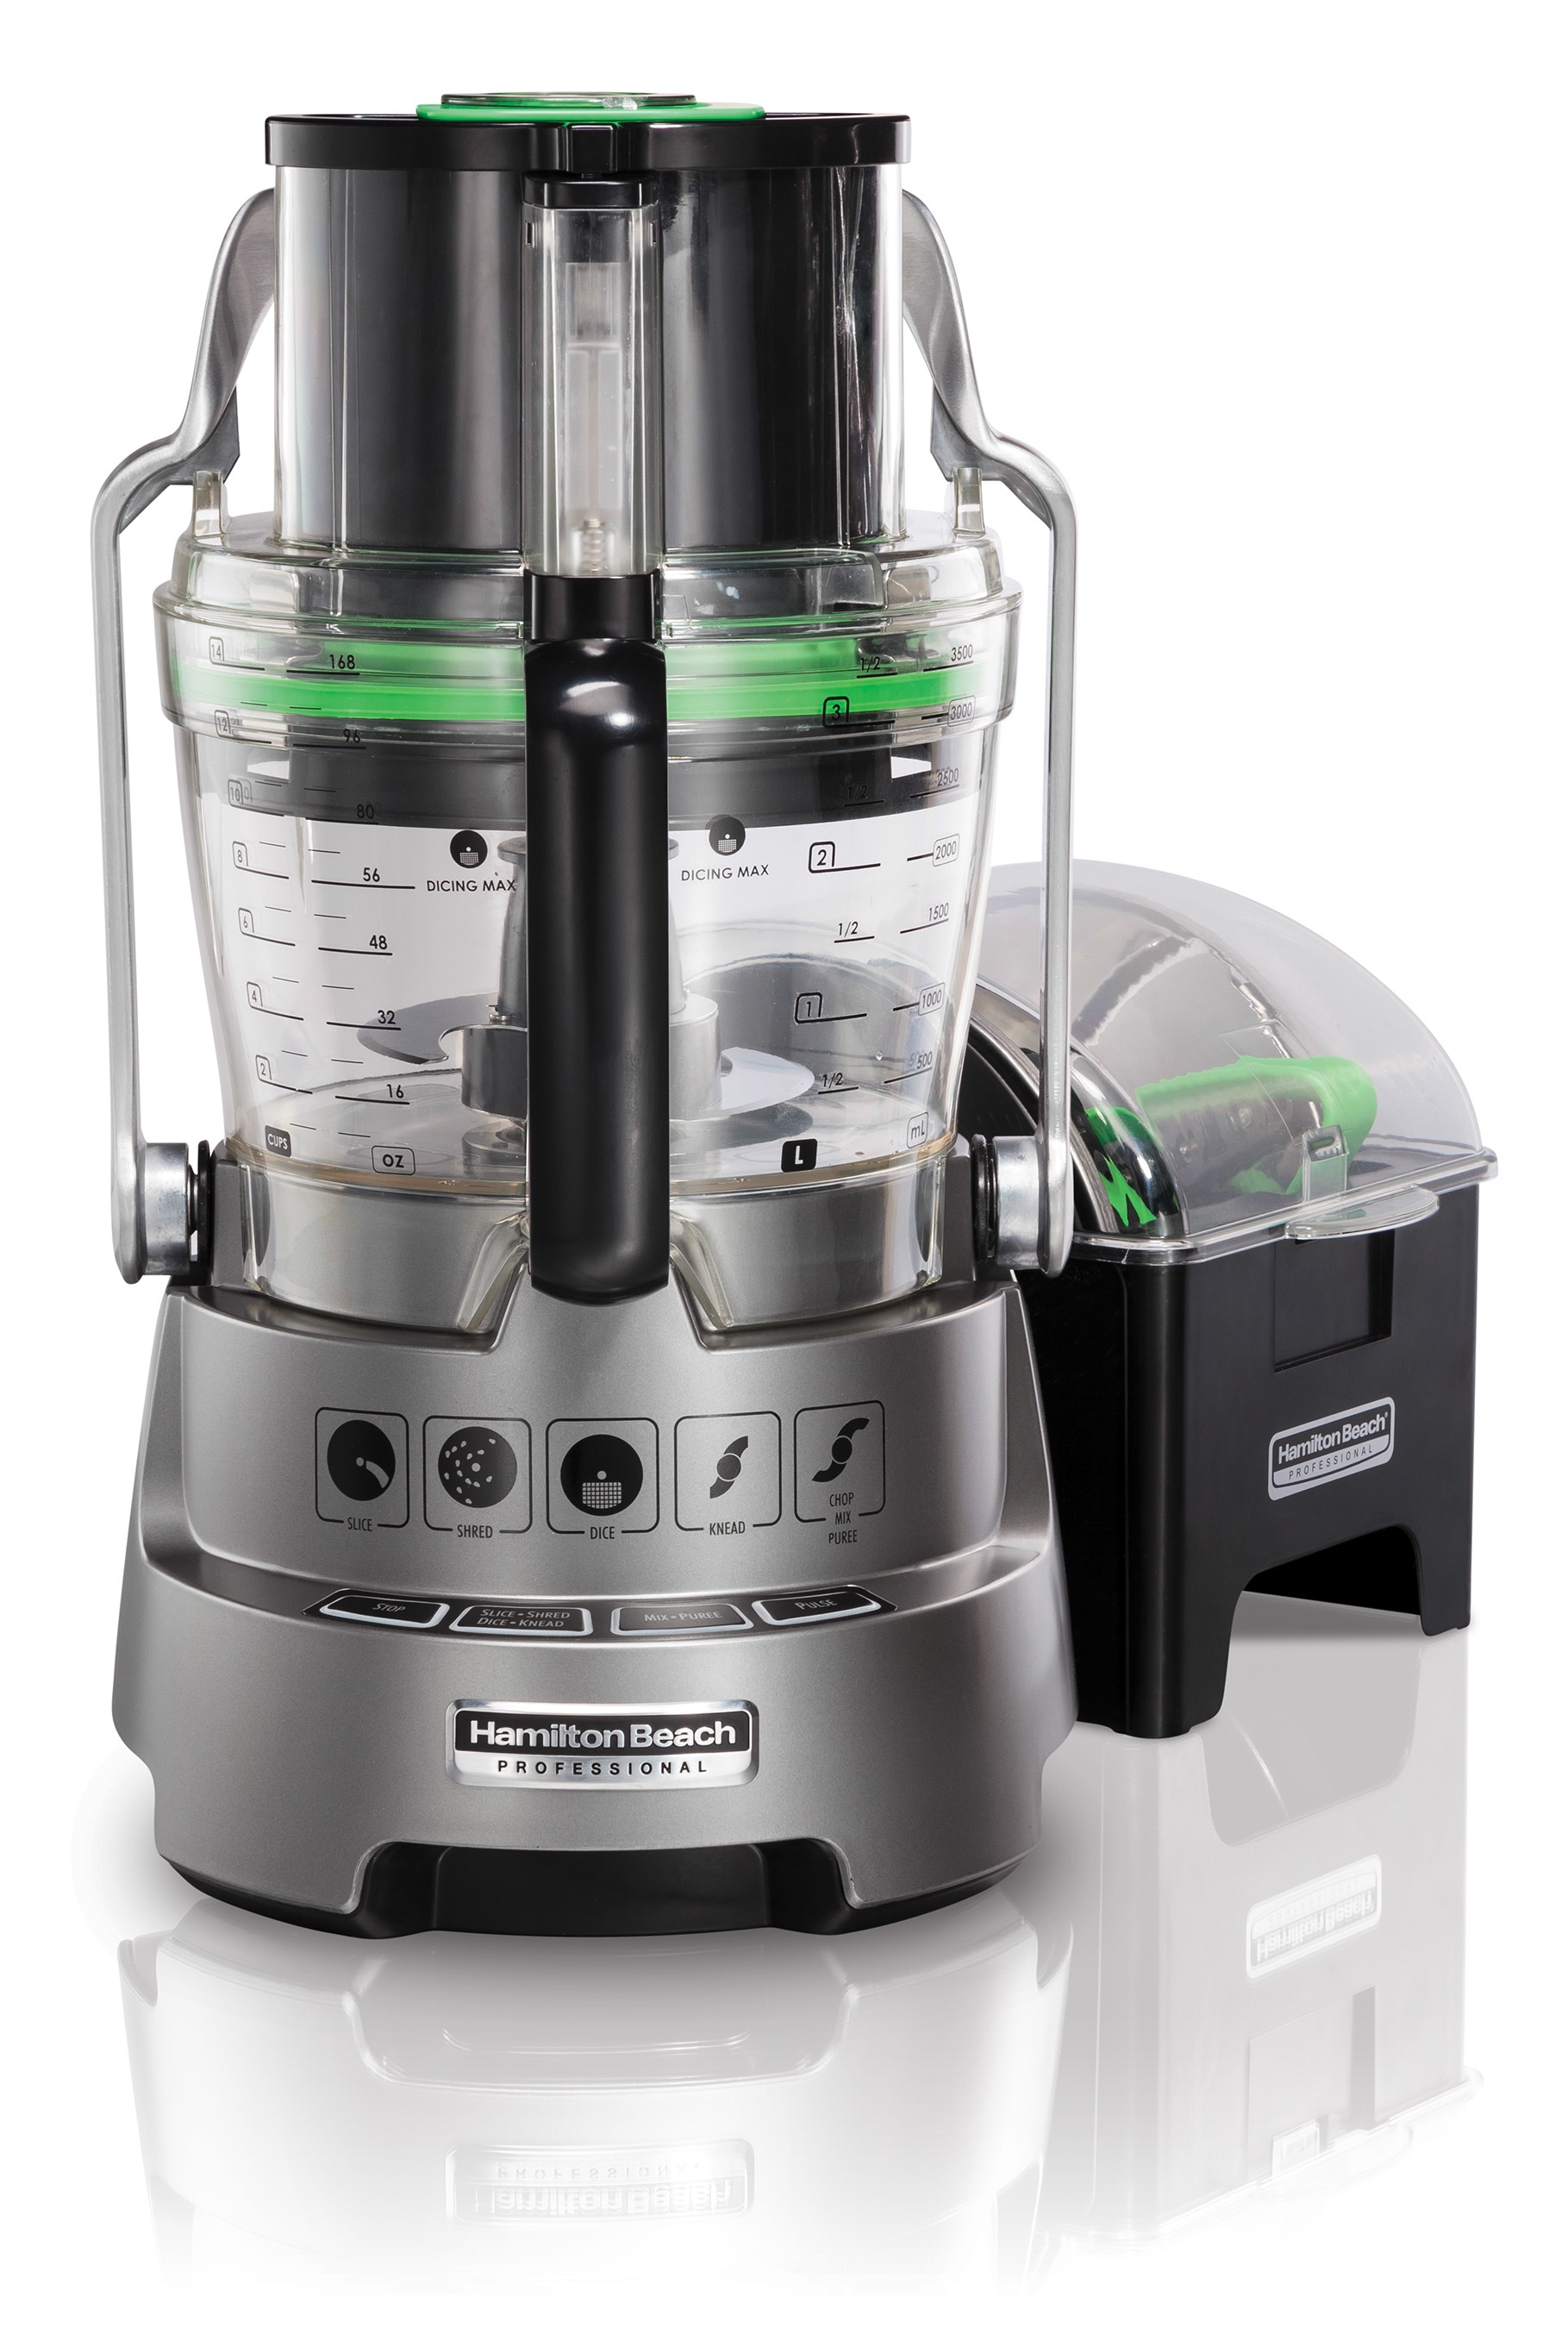 http://www.biteofthebest.com/wp-content/uploads/Hamilton-Beach-Professional-Dicing-Stack-and-Snap-Food-Processor1.jpg